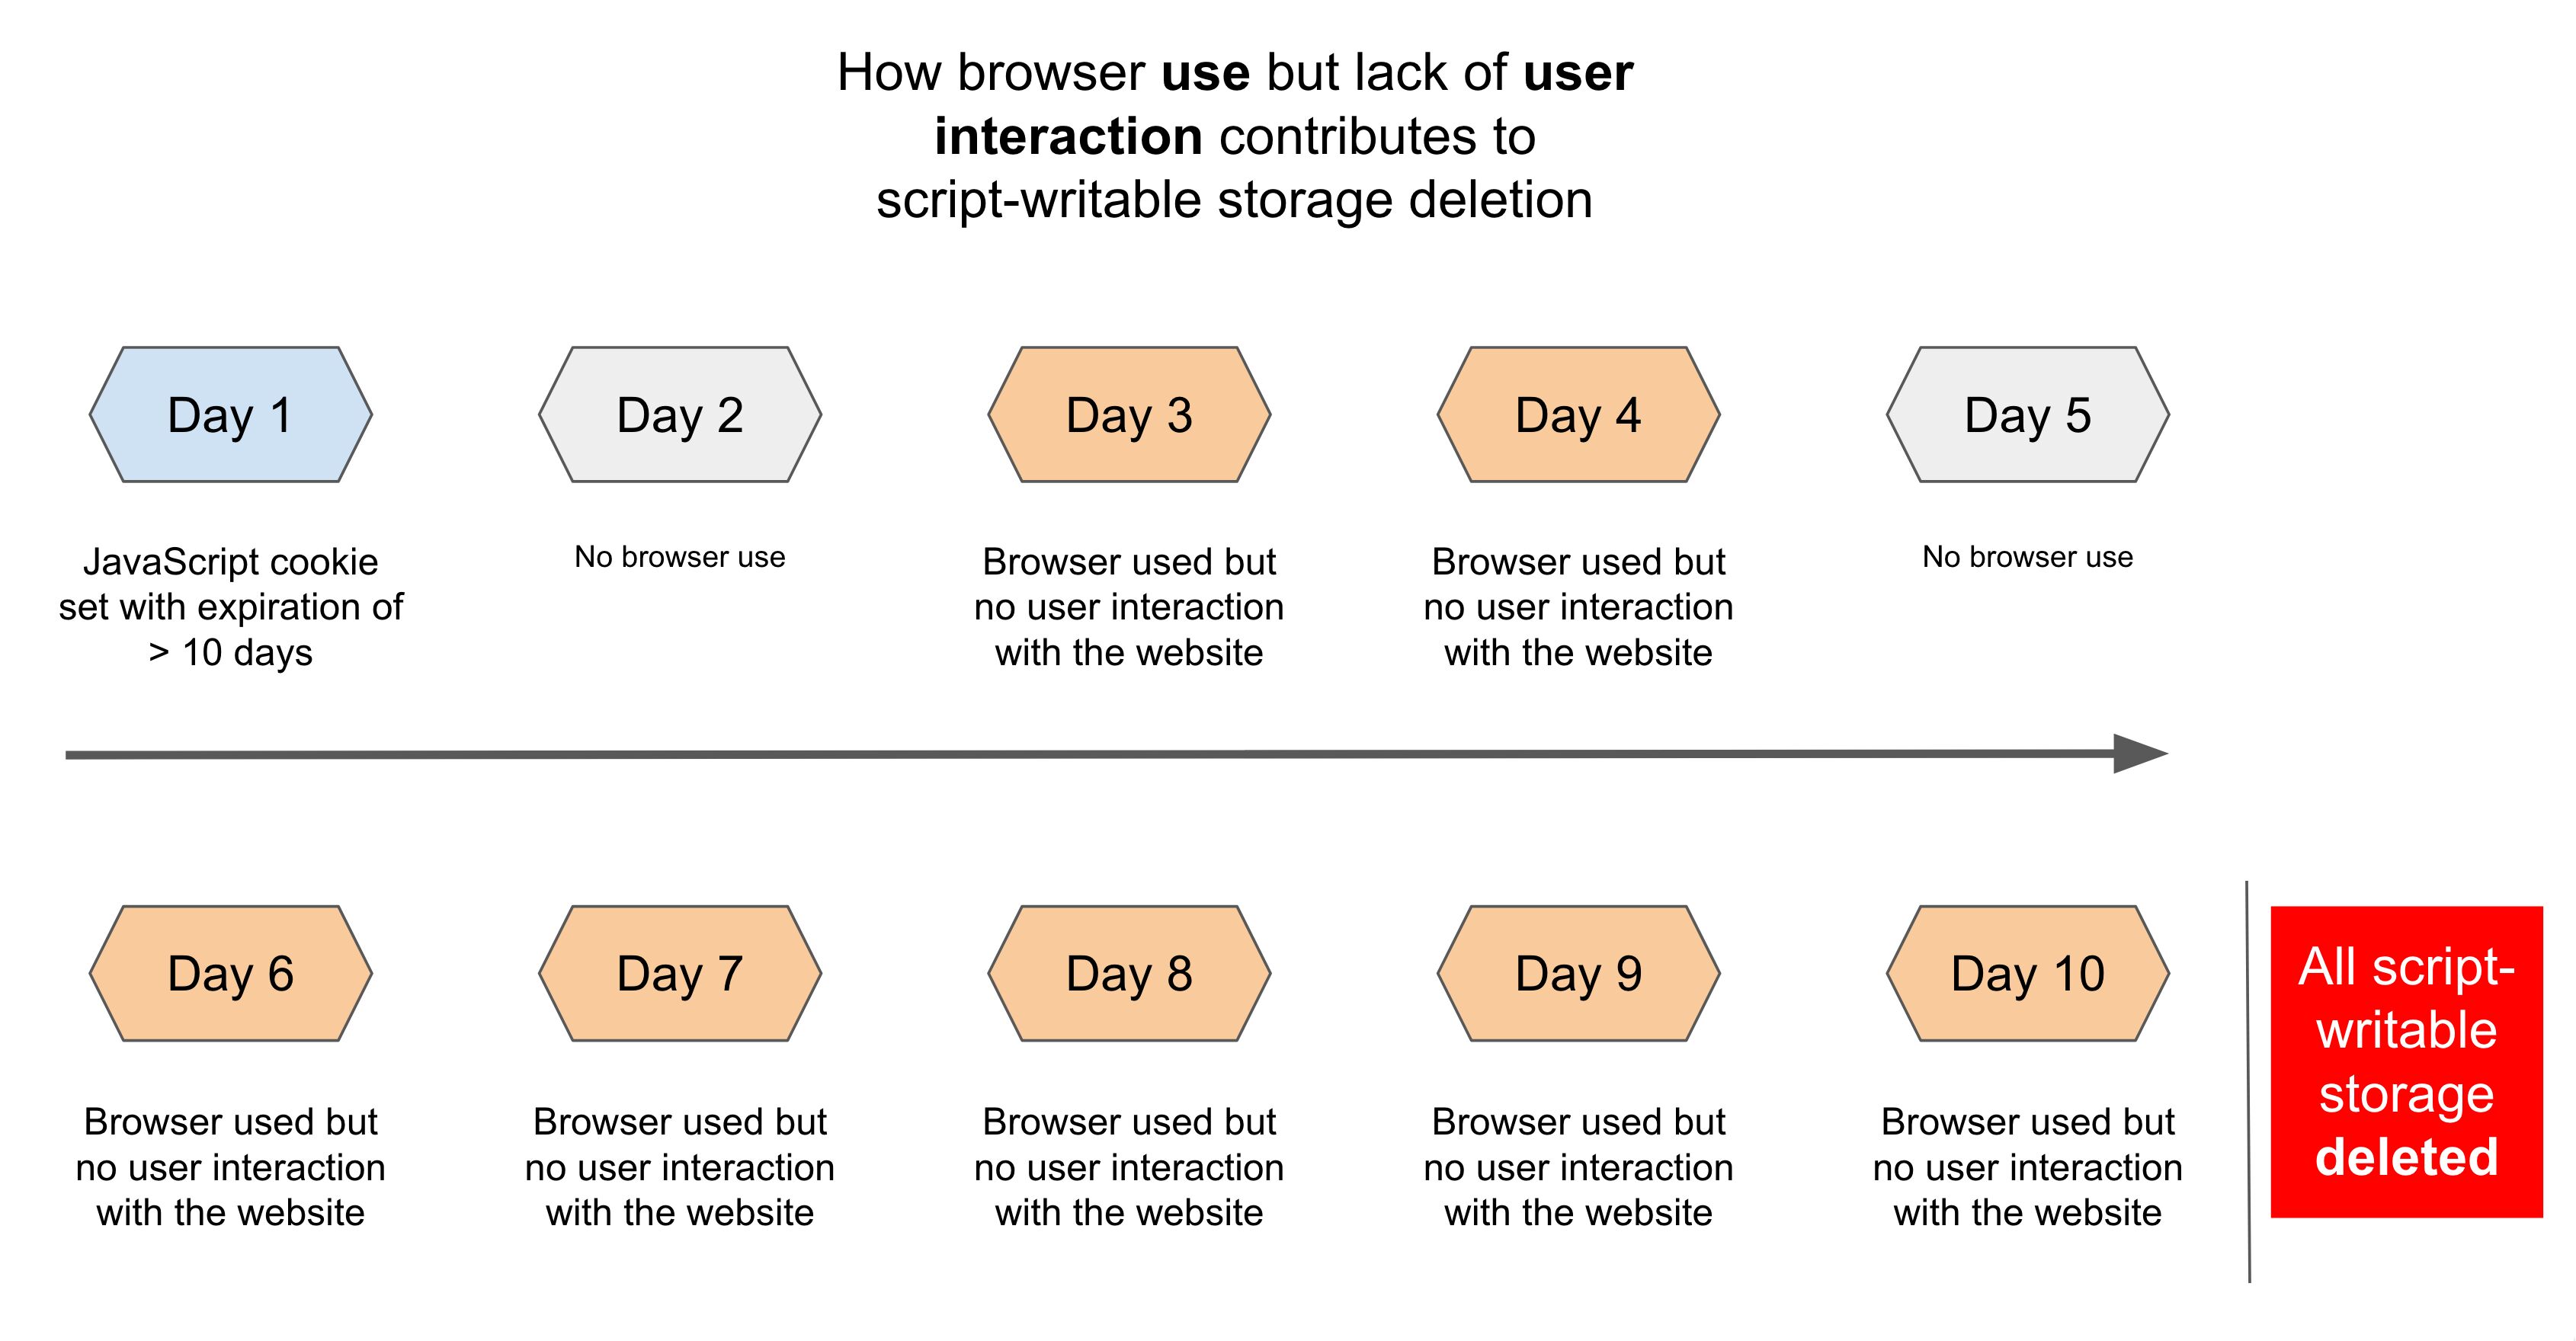 Browser usage in 7 days